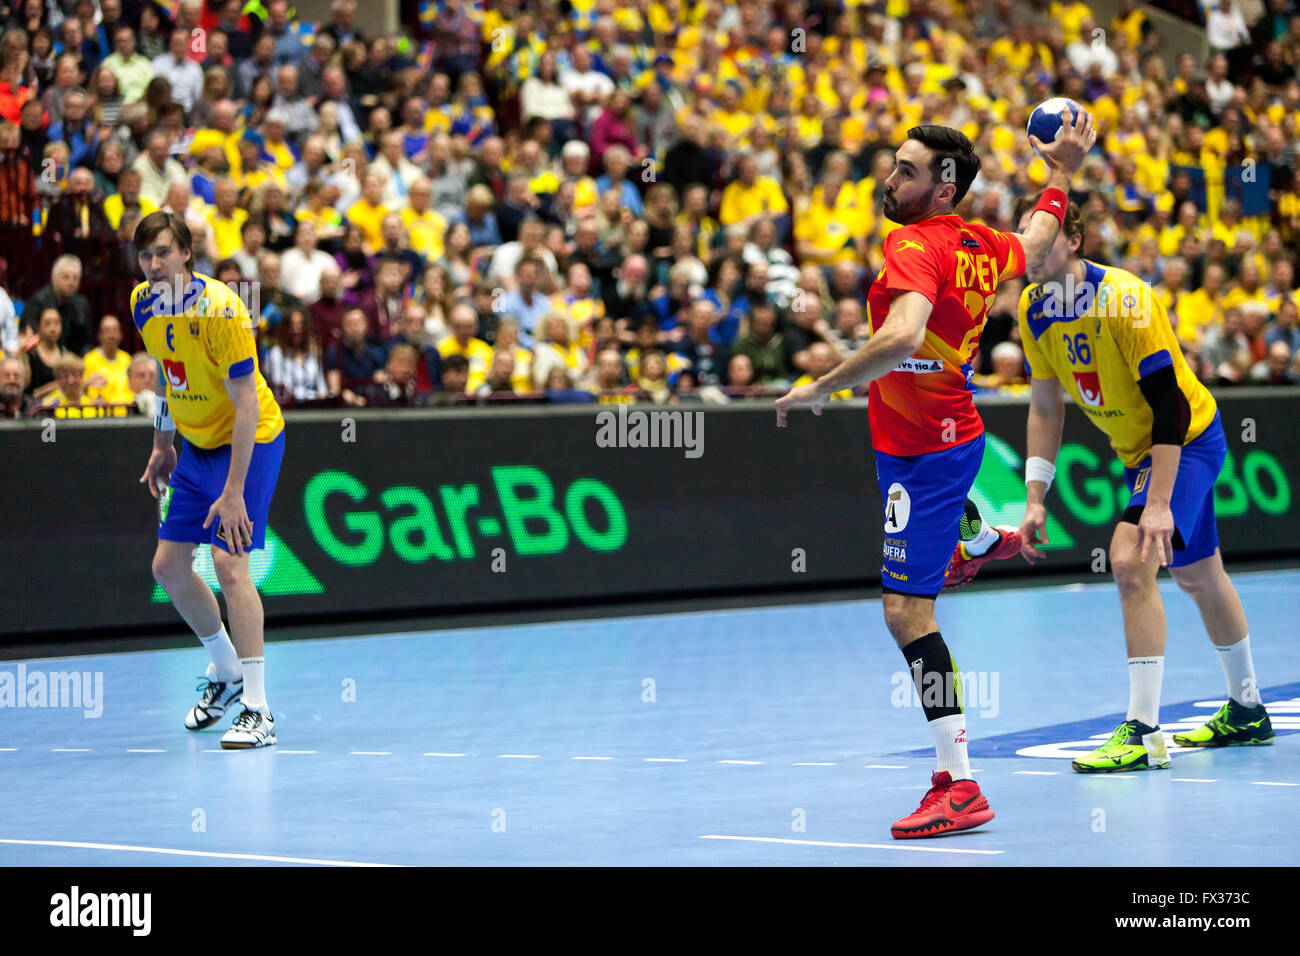 Malmö, Sweden, April 10th, 2016. Valero Rivera Folch (28) of Spain in action during the IHF 2016 Men’s Olympic Qualification Tournament between Spain and Sweden in Malmö Arena.  Spain won the match 25 – 23, but Sweden qualified for Olympic Games participation while Spain for the first time in 40 years did not qualify. Credit:  OJPHOTOS/Alamy Live News Stock Photo